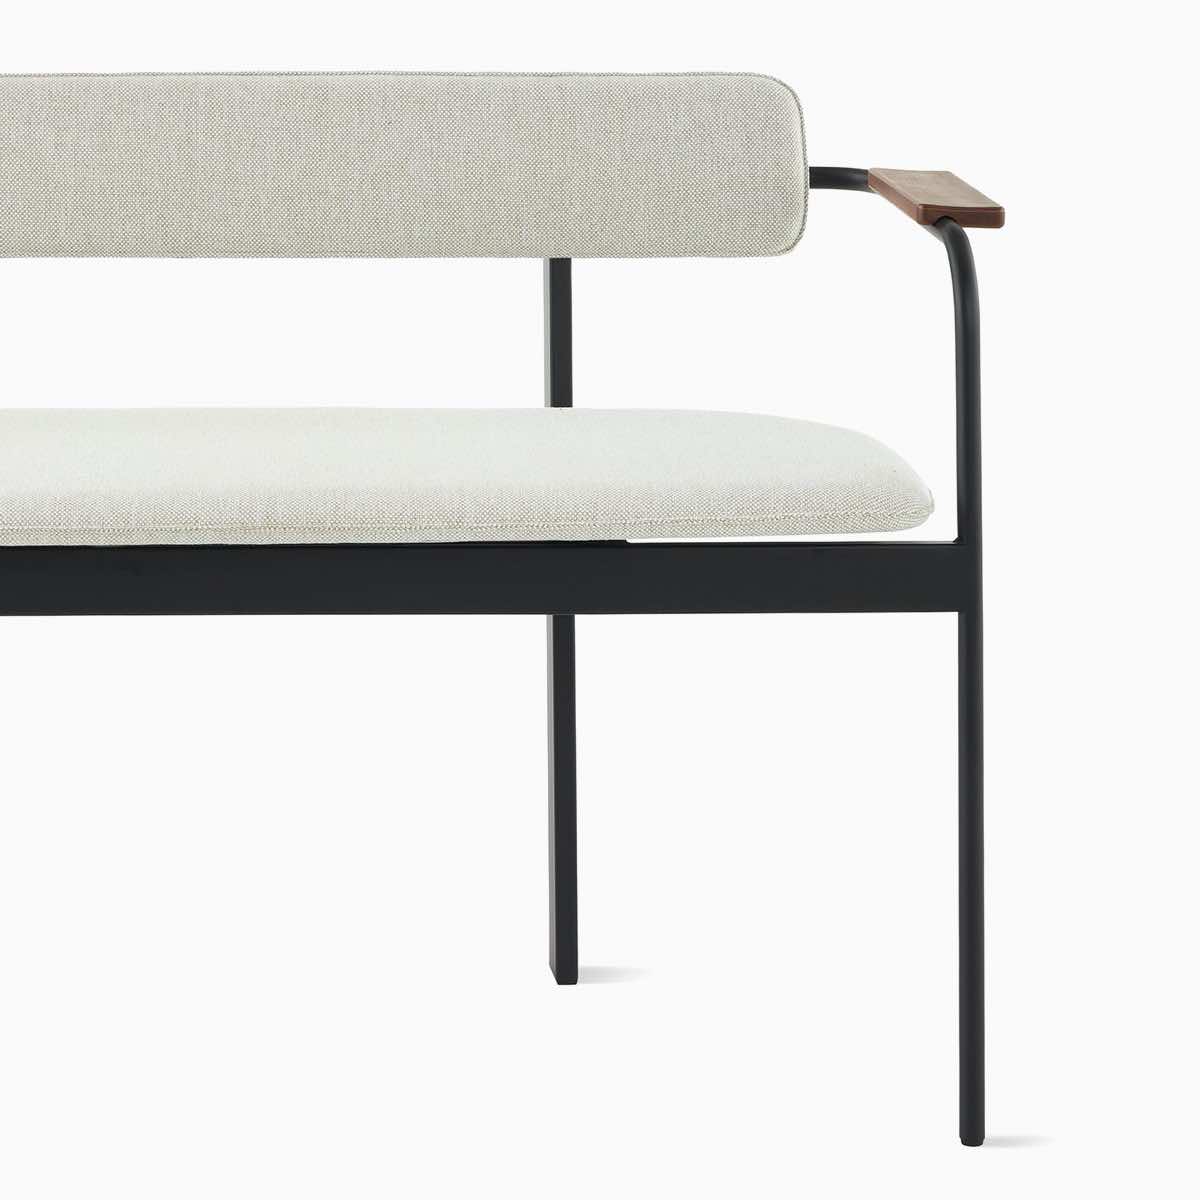 A Betwixt Bench with grey fabric seat and backrest, with walnut arms and a black frame.